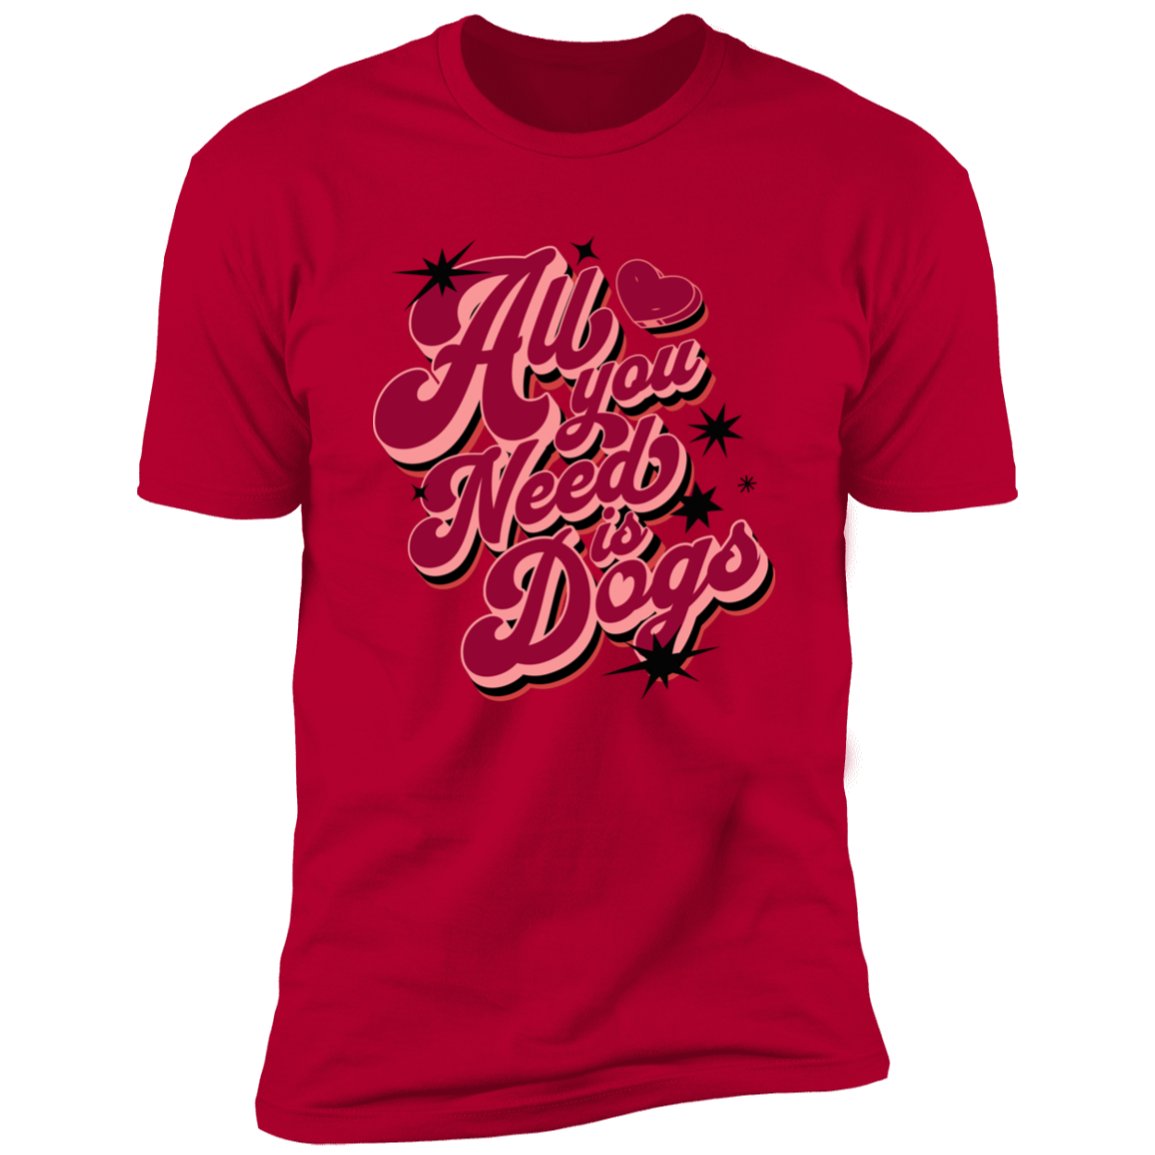 All I Need is Dogs T-shirt, Dog Shirt for humans, in red